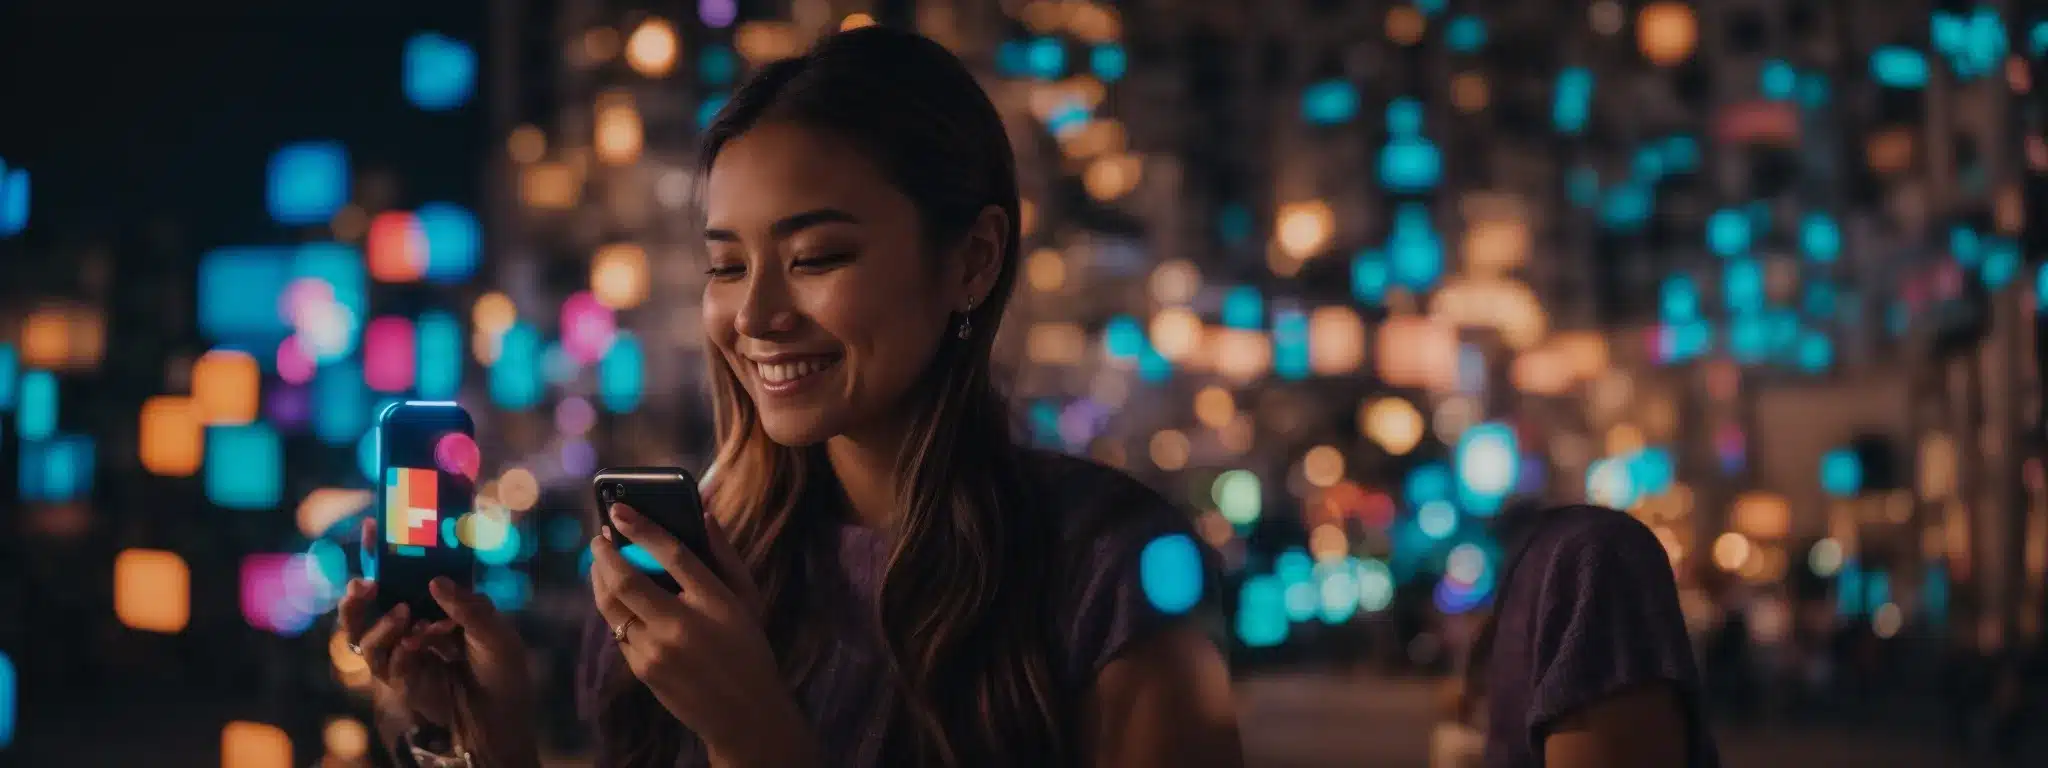 An Influencer Smiling While Holding A Phone And Interacting With A Colorful, Illuminated Social Media Interface Projection.